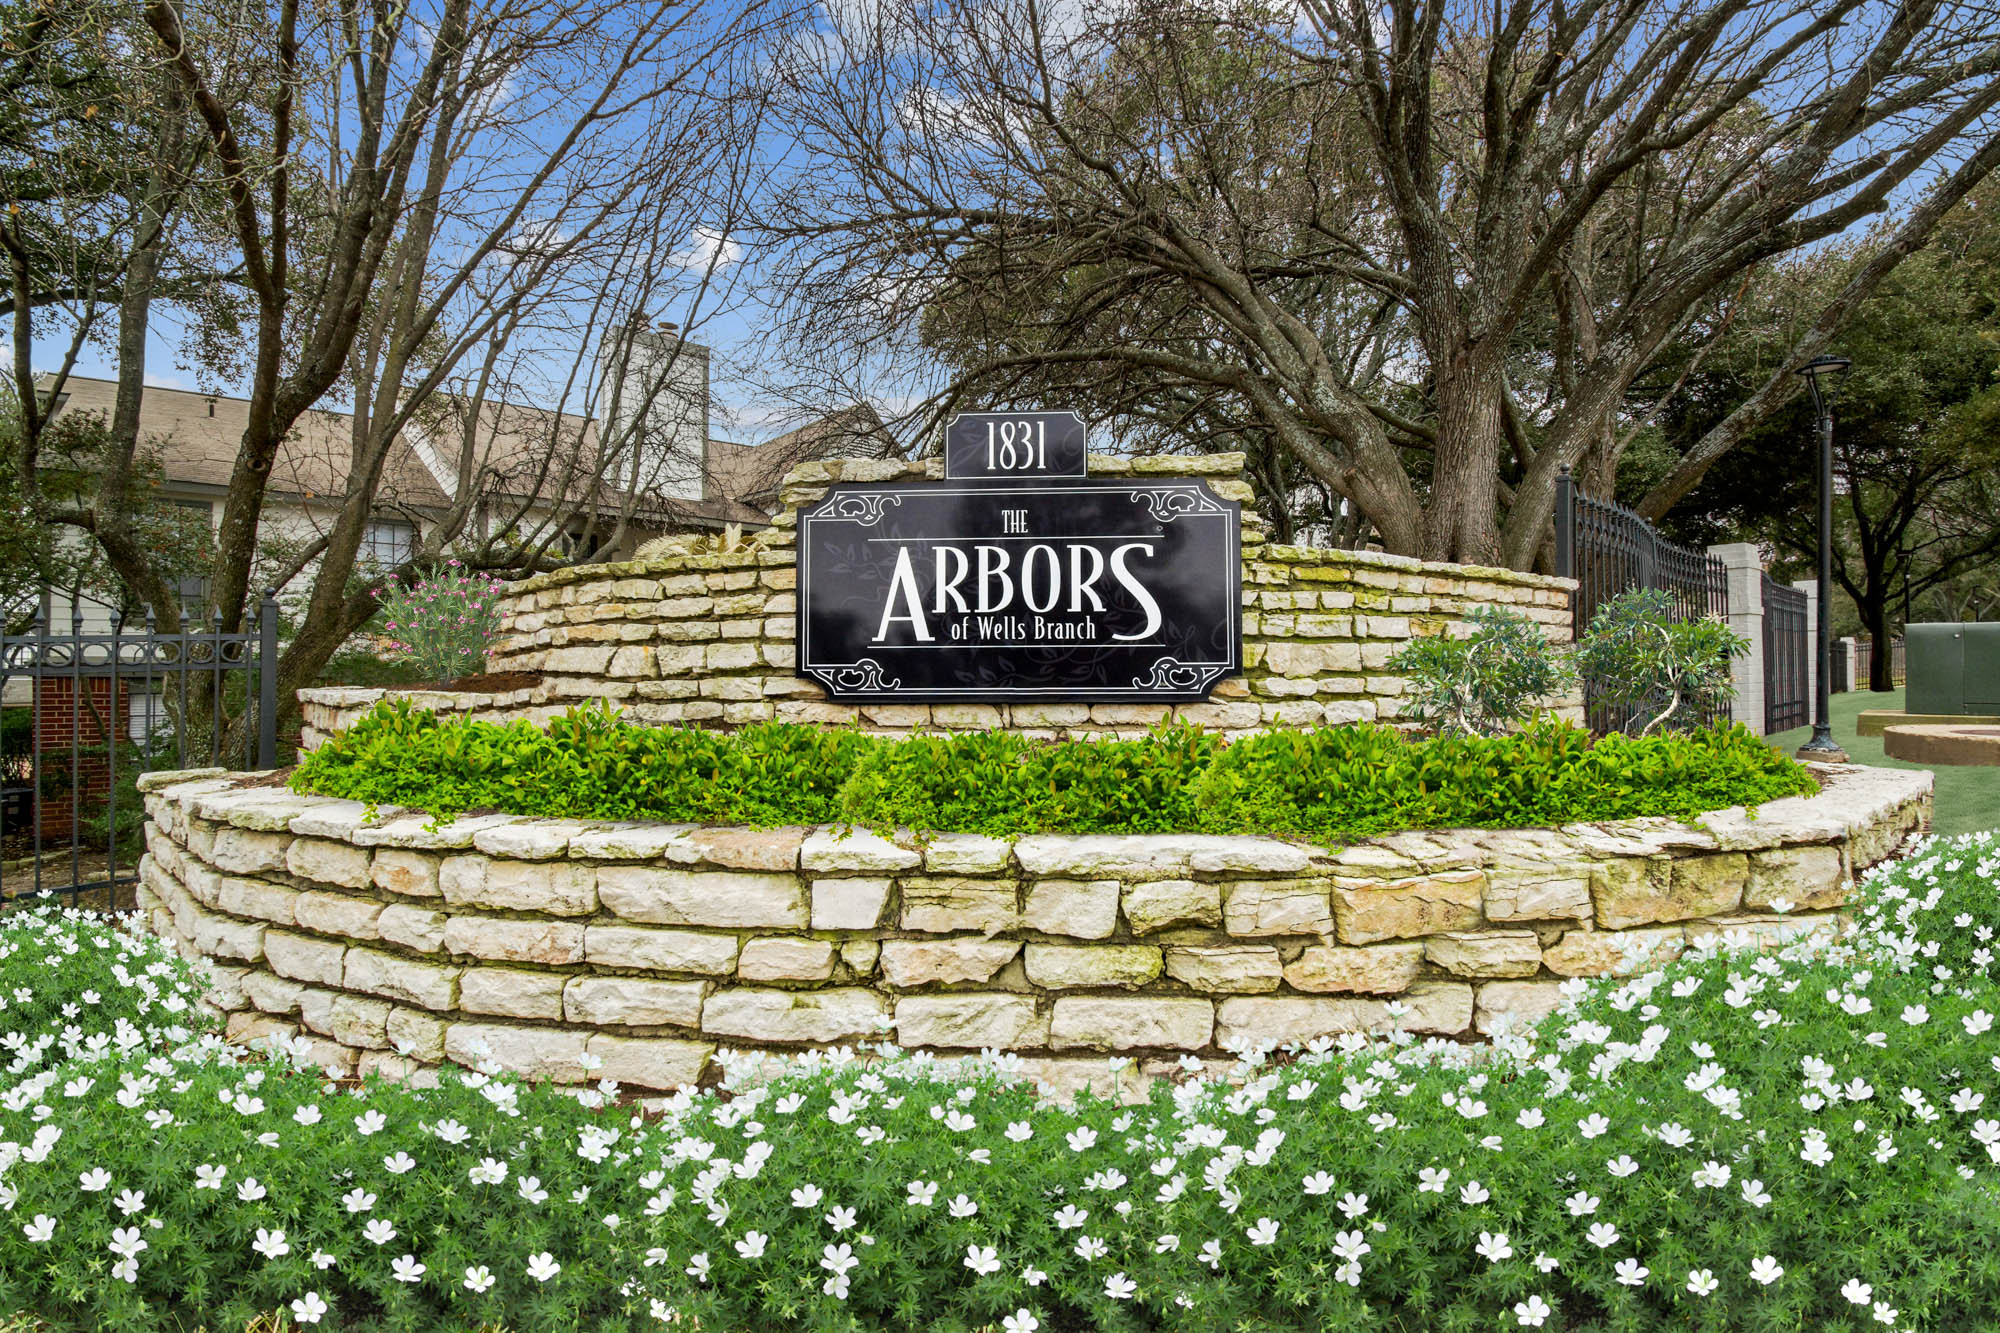 The main entrance sign at The Arbors of Wells Branch apartments in Austin, TX.